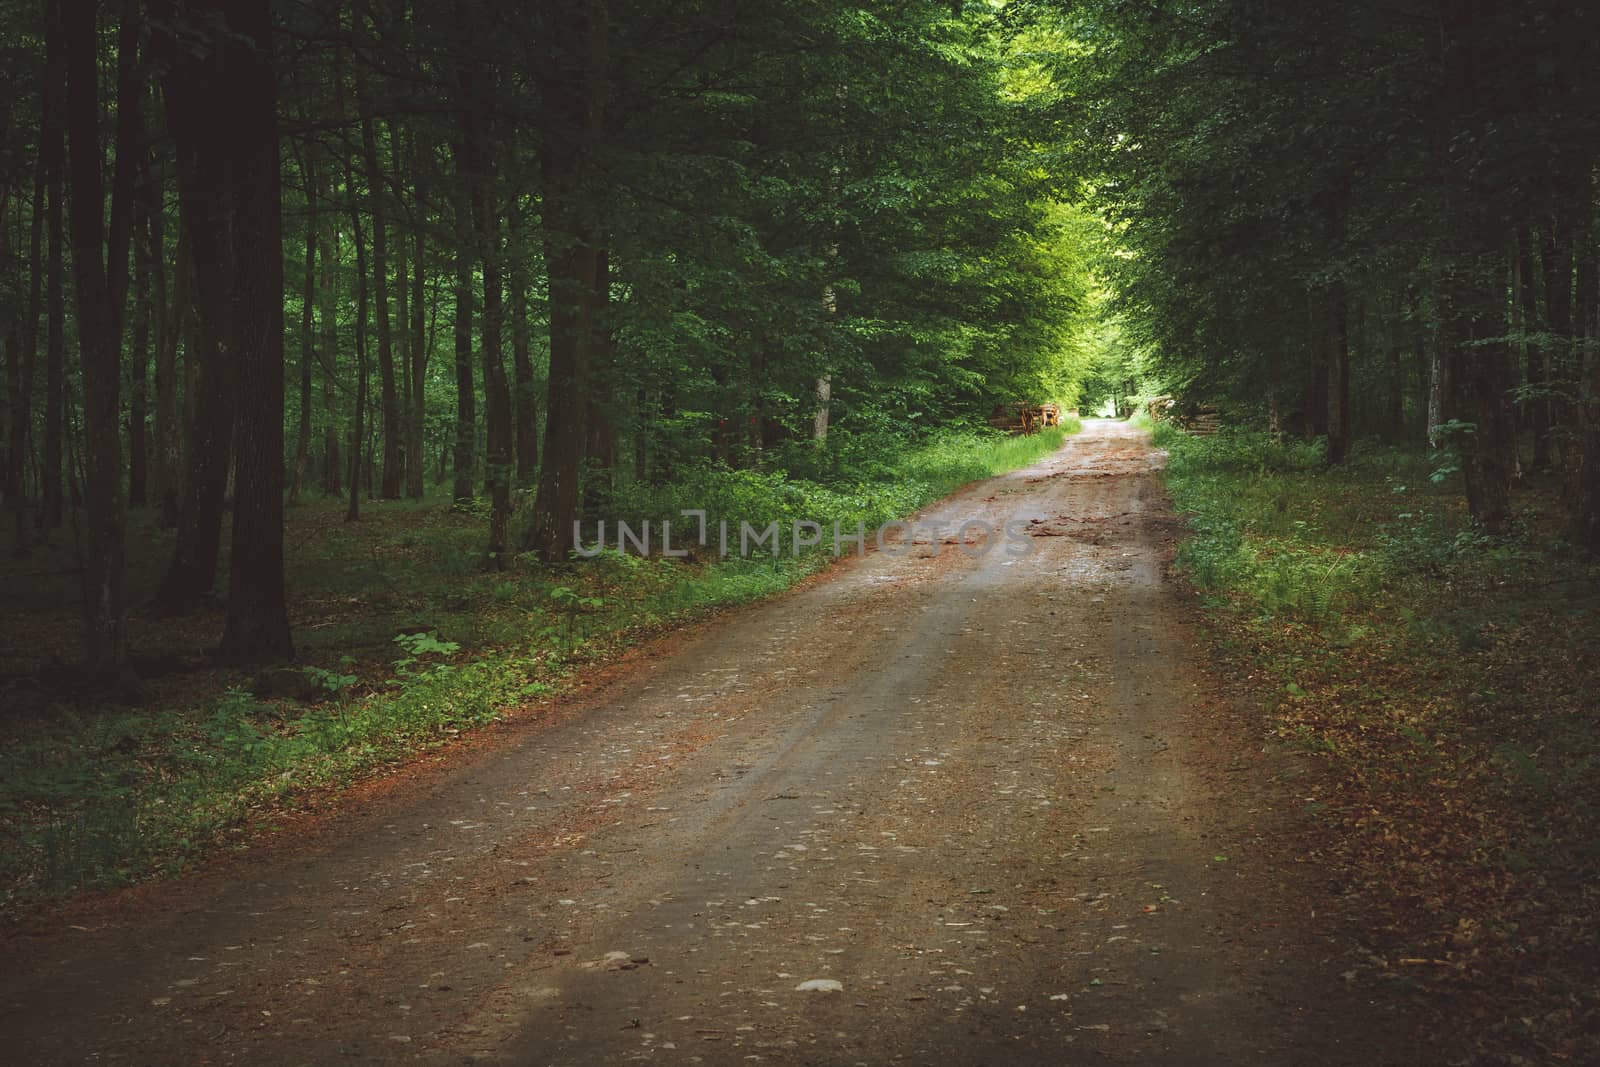 A road in a mysterious forest, Landscape Park, Nowiny, Eastern Poland